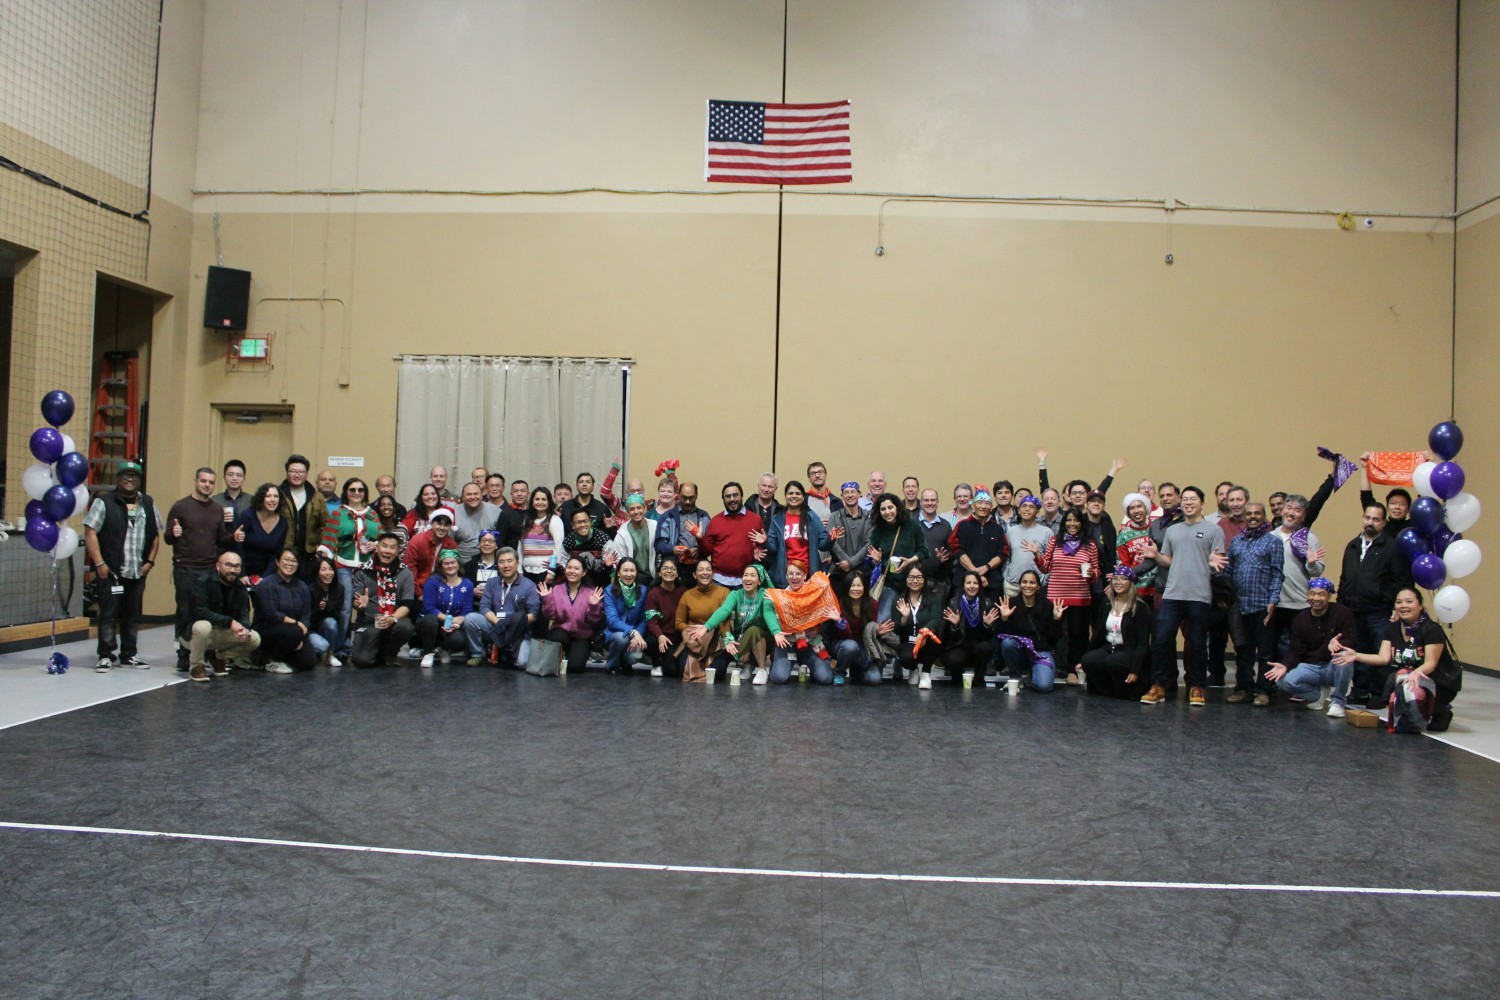 Company holiday, A Moment of Unity in Our Diverse Community